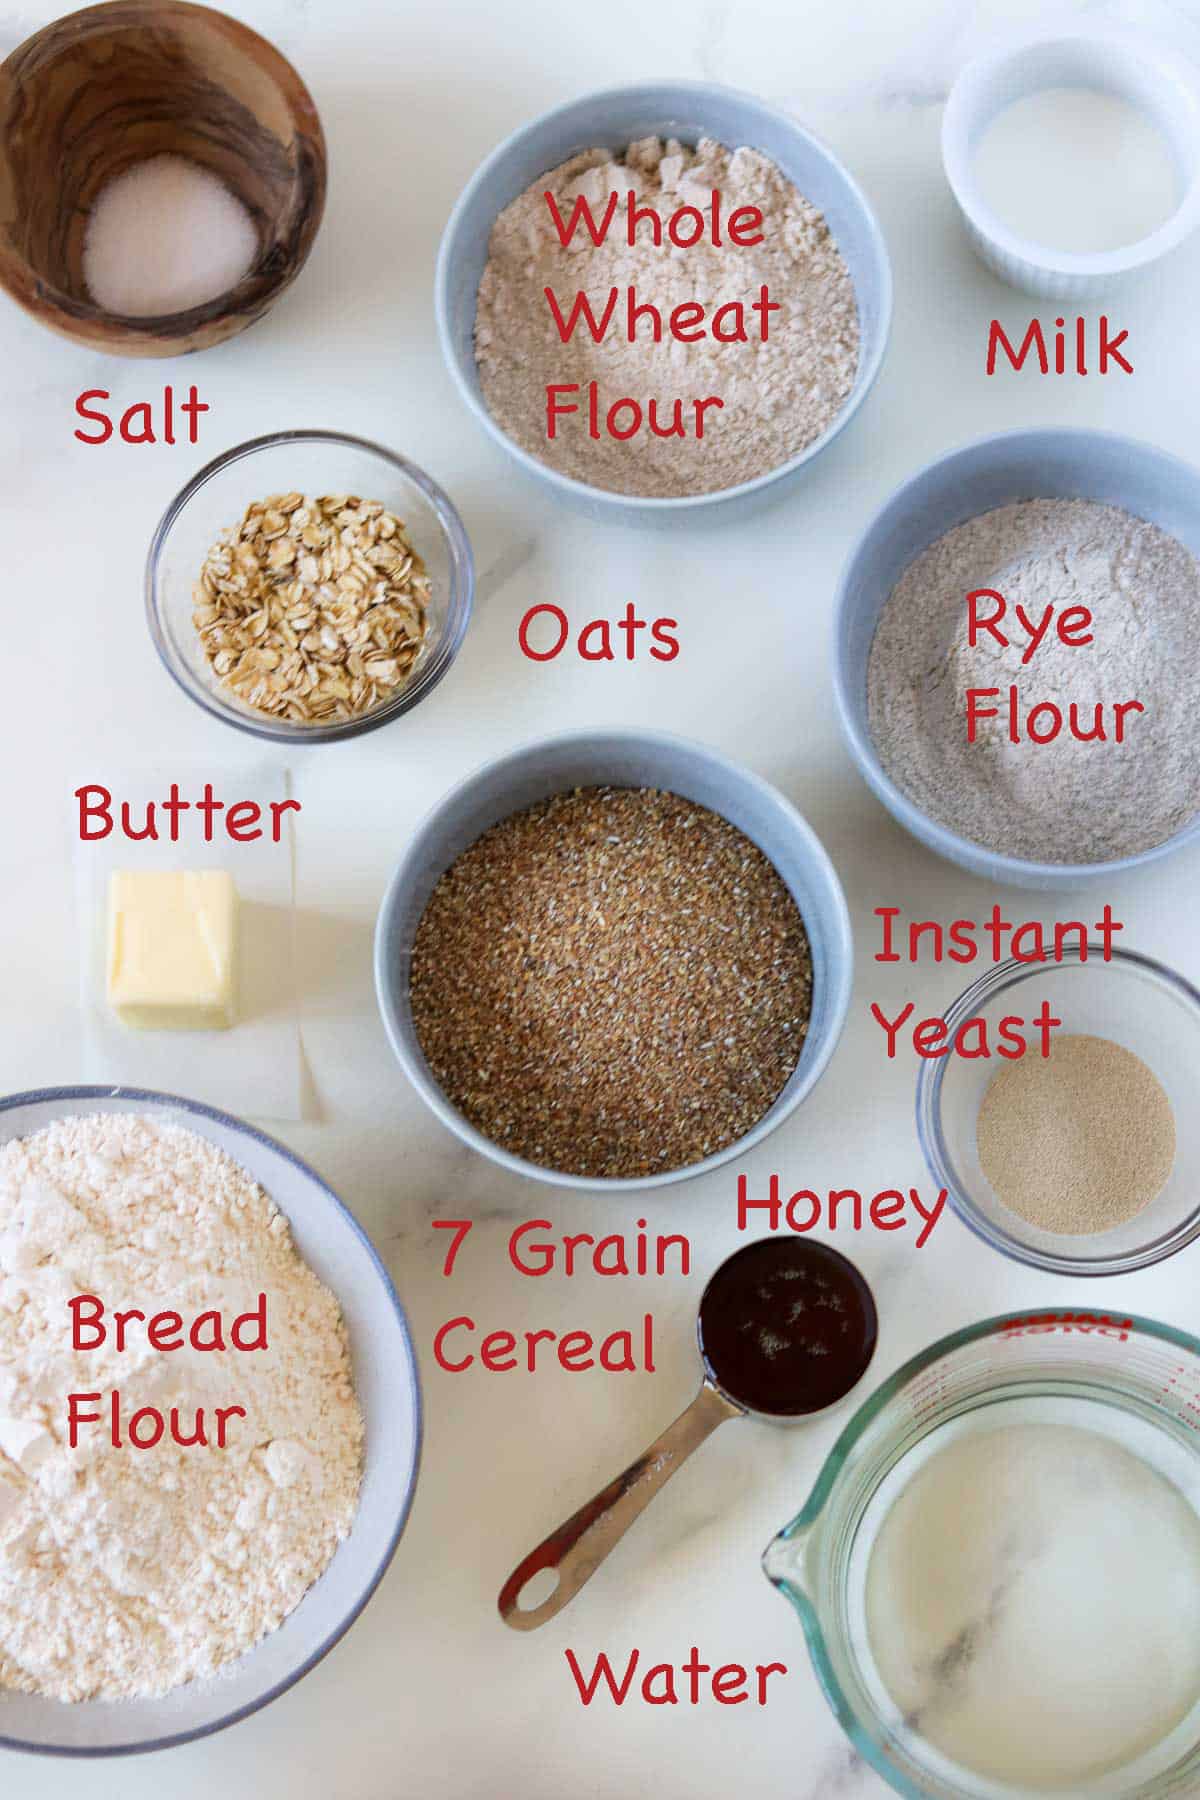 Labeled ingredients for Norwegian Brown Bread with Oats and Rye